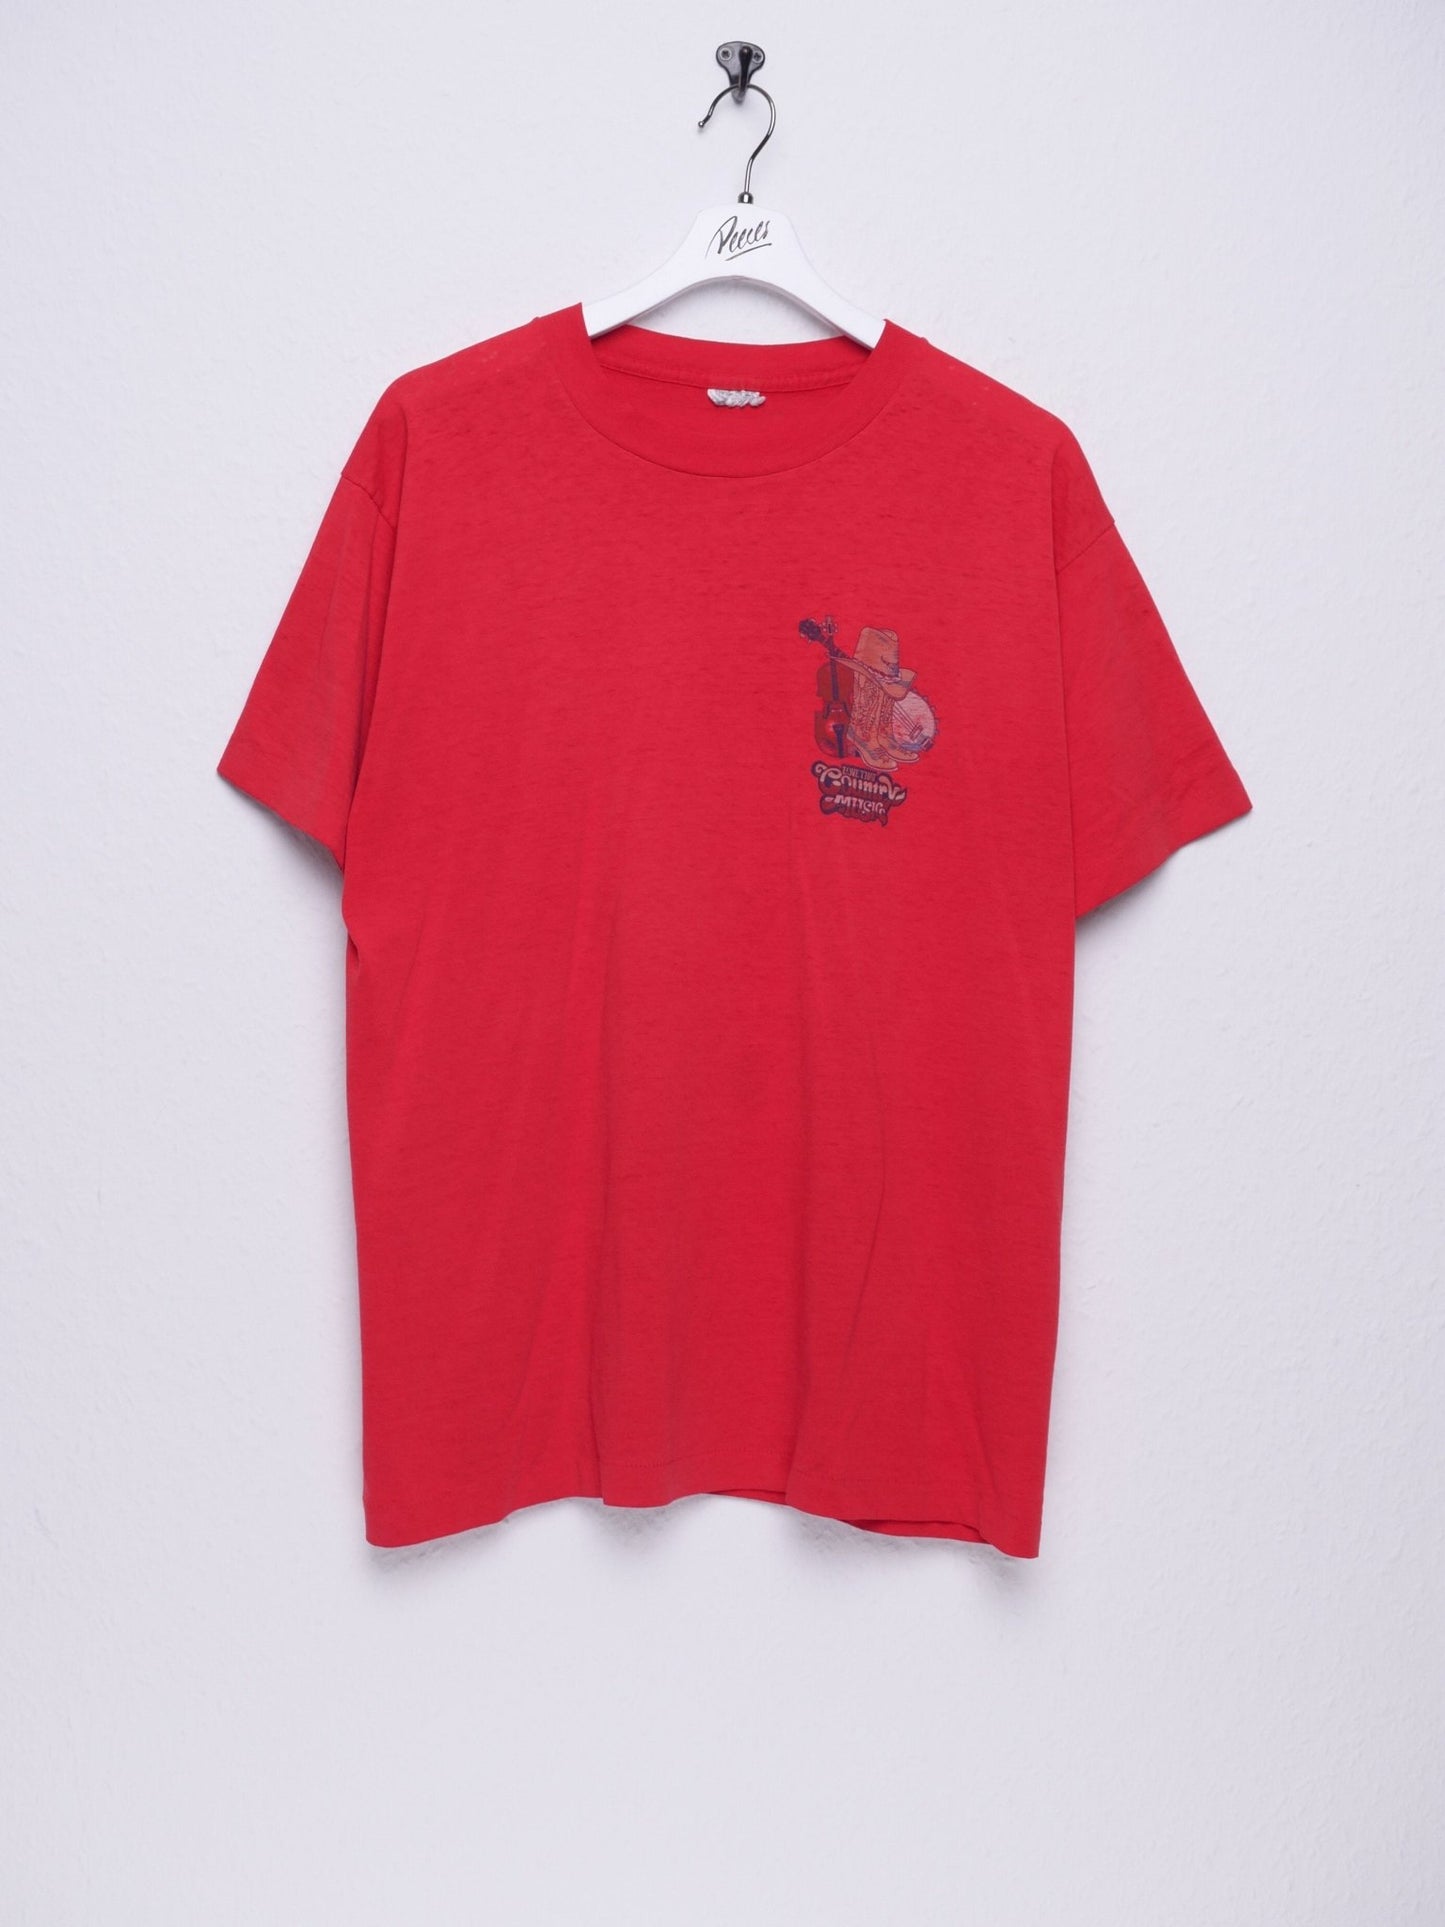 'Love that Country Music' printed Logo red Shirt - Peeces